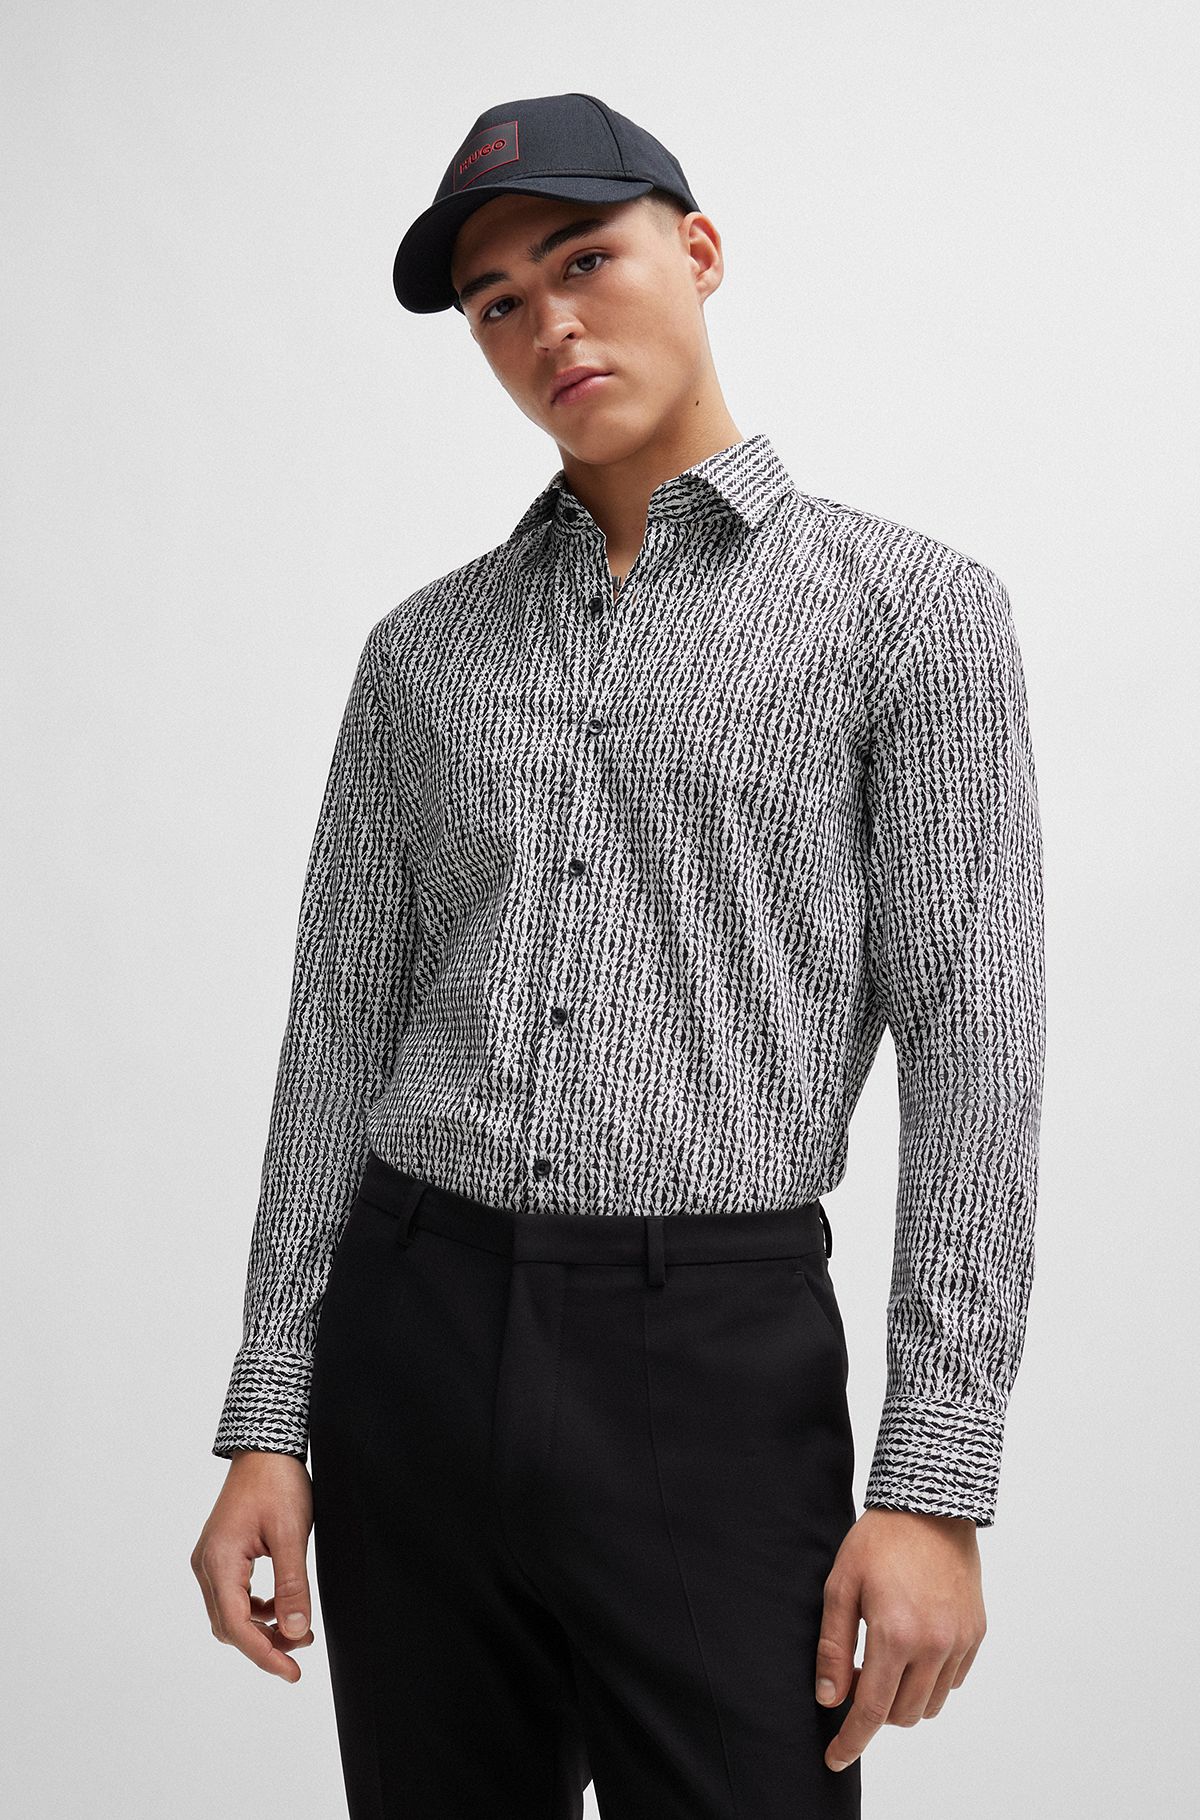 Shirts in White by HUGO BOSS